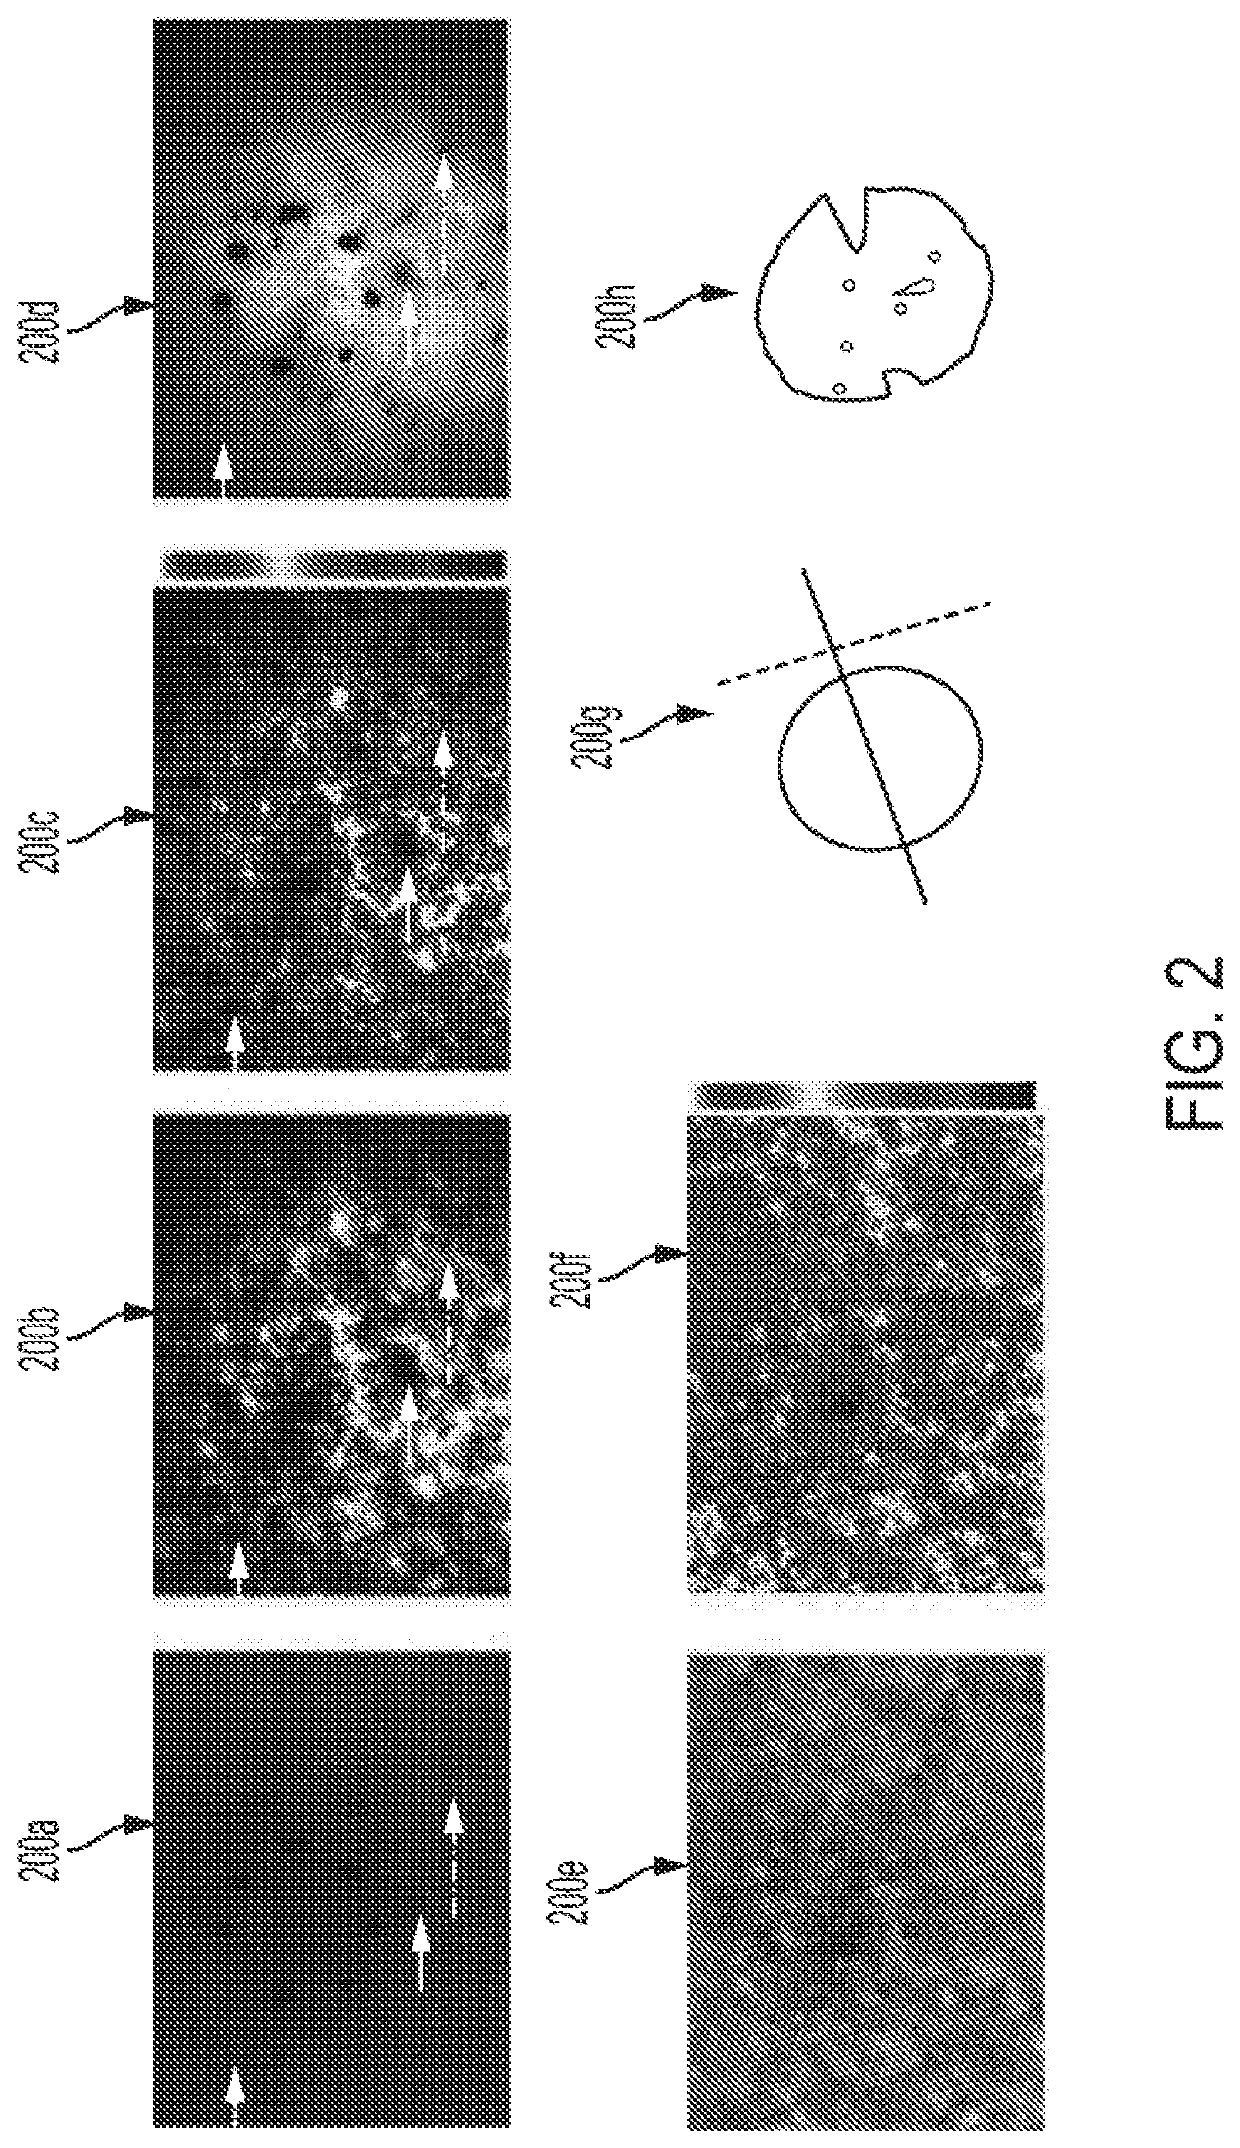 Spectrally encoded optical polarization imaging for detecting skin cancer margins